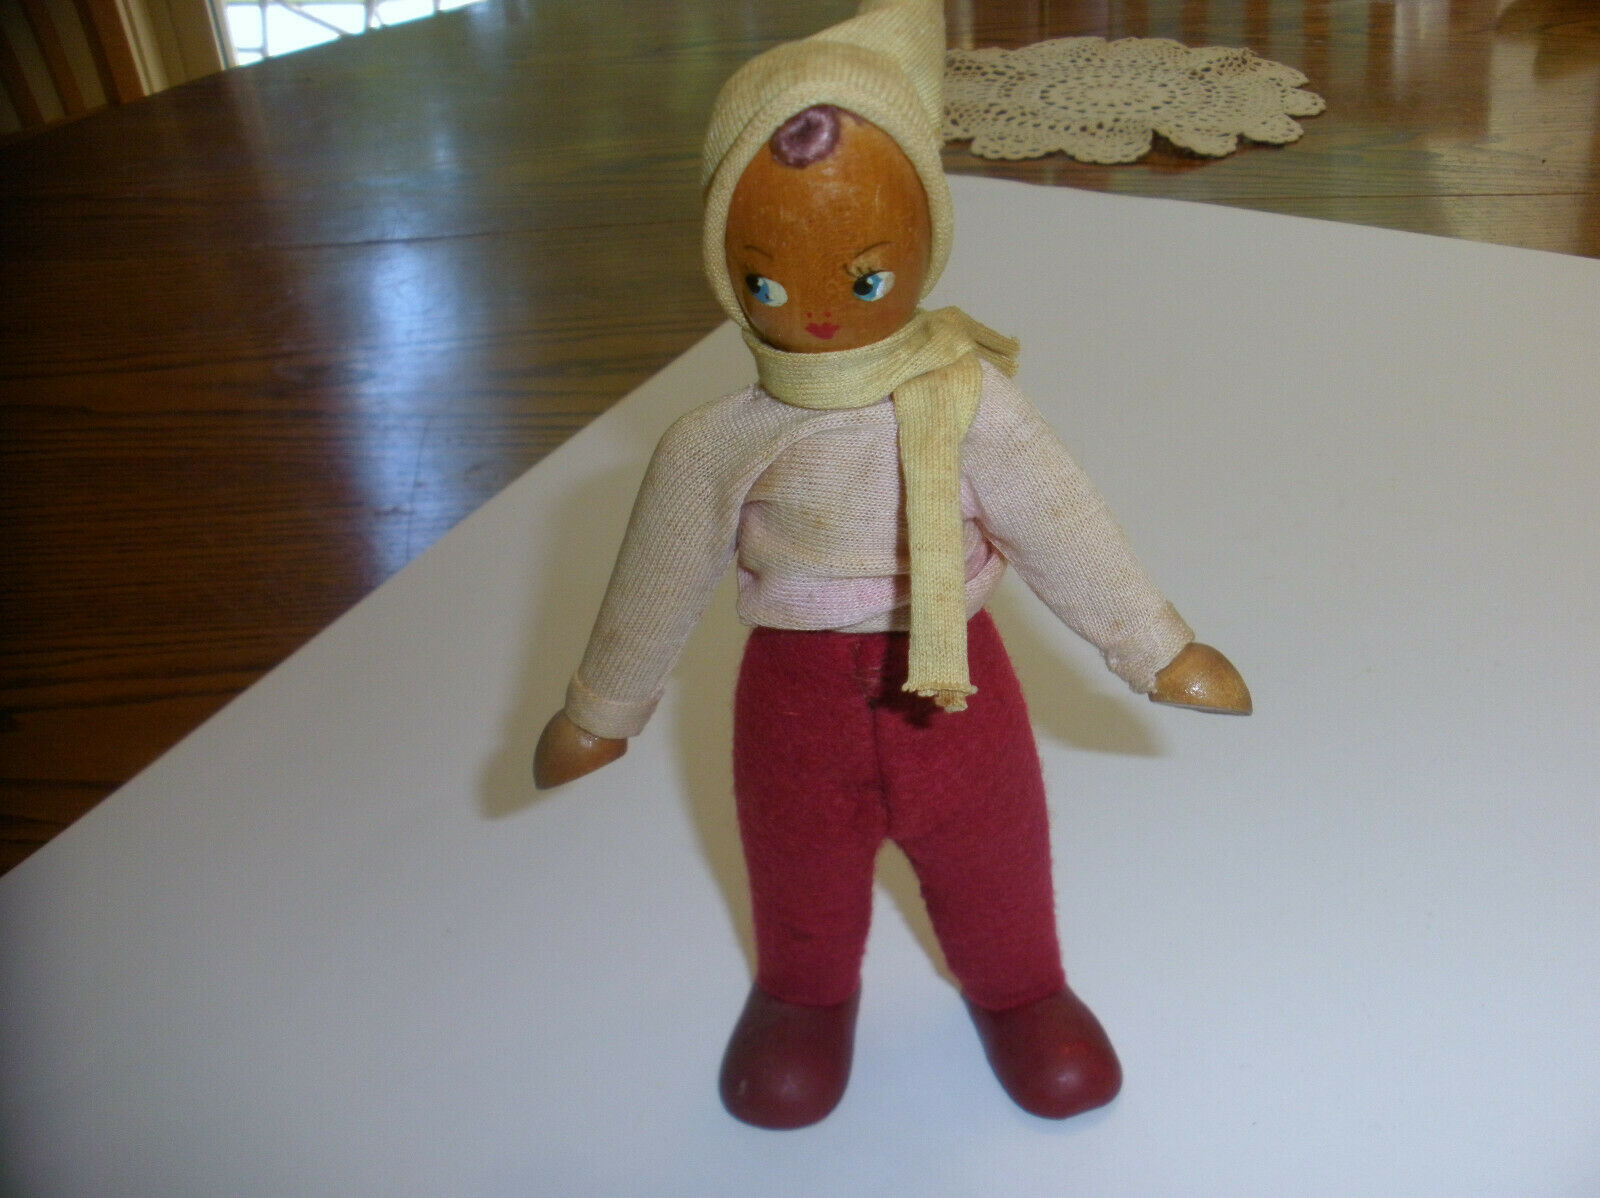 Vintage Wooden Girl Doll From Poland, Hand Painted Face.Movable Arms & Legs